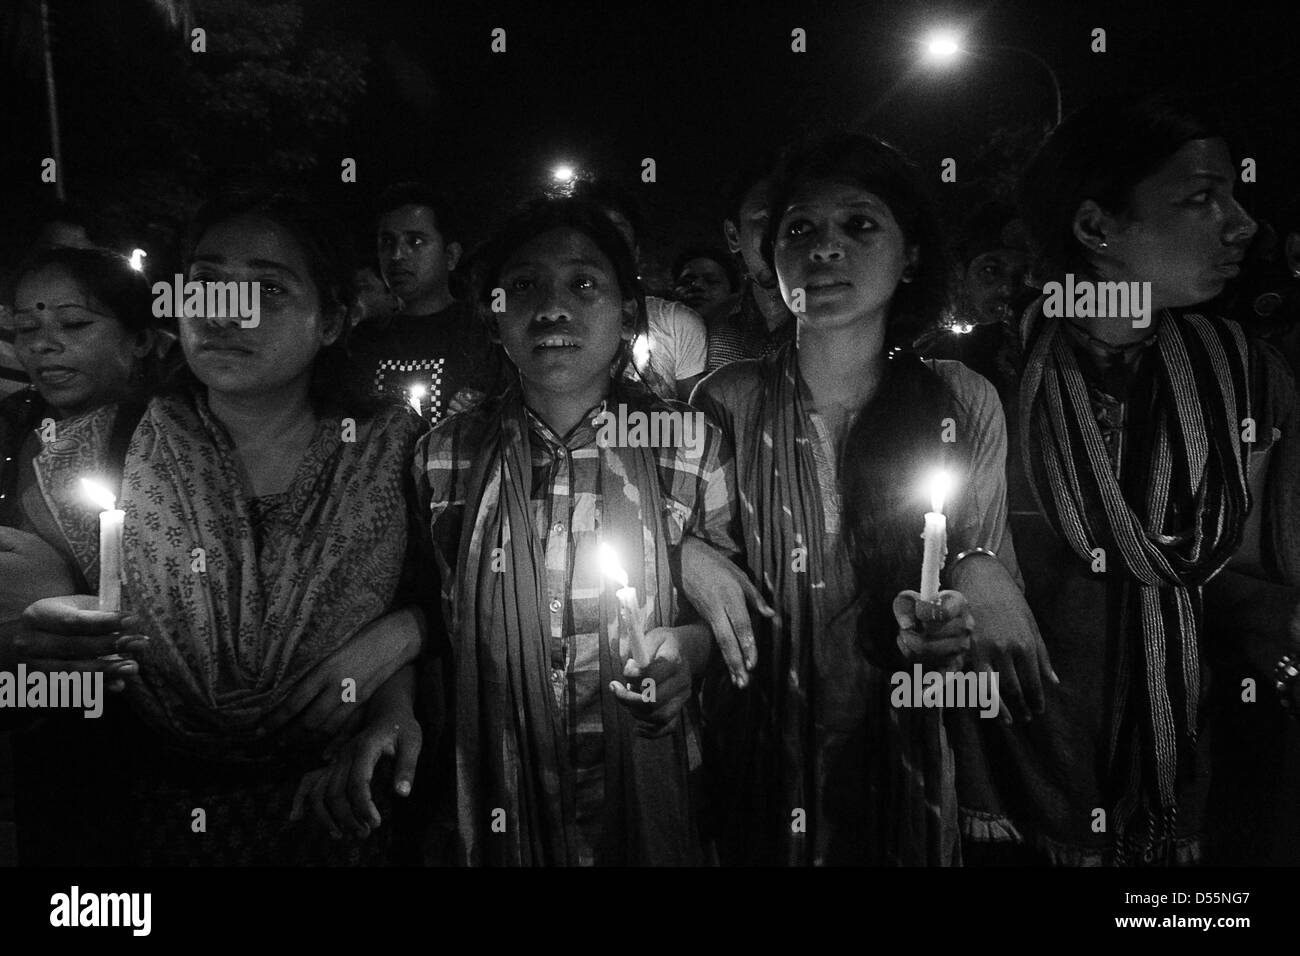 Dhaka, Bangladesh. 25th March, 2013. The organization of  the Ganajagaran Manch uprising at Shahbagh intersection remembered the Dark Night of the 25 March, 1971, wtih a candlelit processing in the capital of Dhaka in 25 march 2012. In 1971 when the Pakistan army attacked Bengali civilians in an attempt to end their peaceful civil disobedience movement spearheaded by Bangabandhu Sheikh Mujibur Rahman which led to independence. Pakistan's military chief and President Yahya Khan ordered the troops to crack down before leaving Dhaka for Pakistan on the evening of Mar 25 Stock Photo